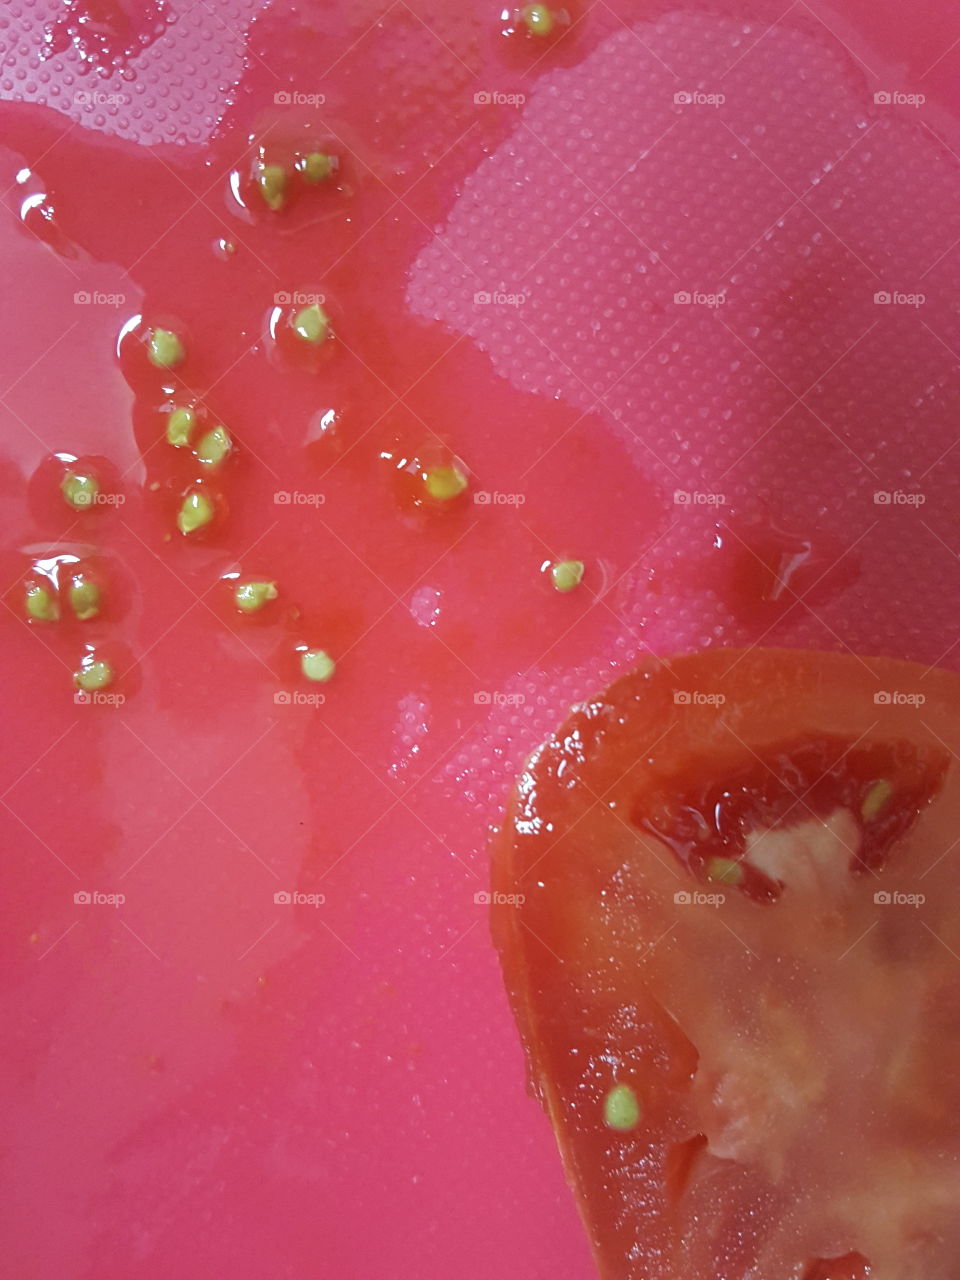 Tomato slice and seeds on red background